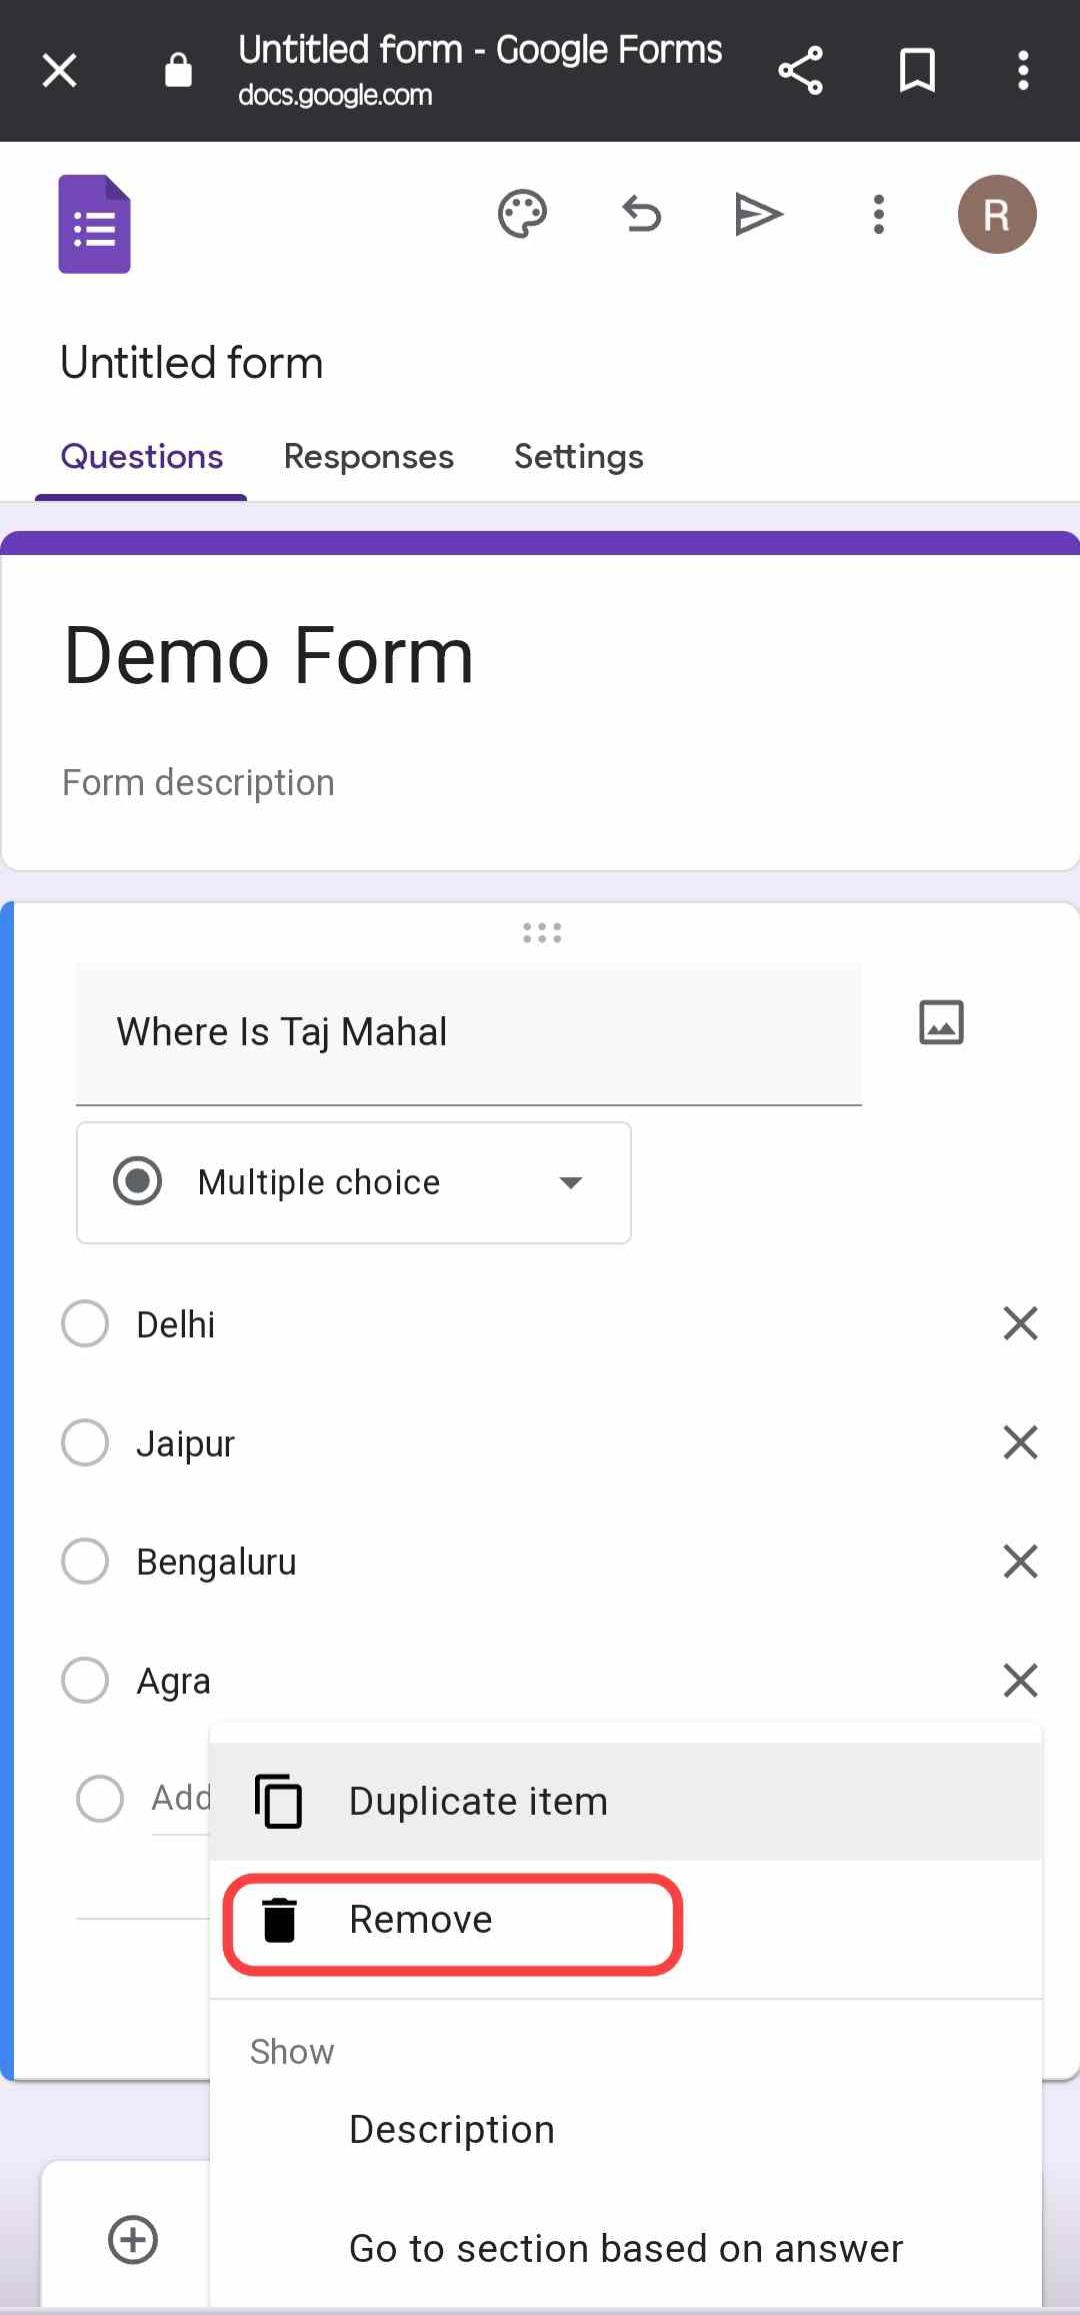 Google Form entire set will be deleted